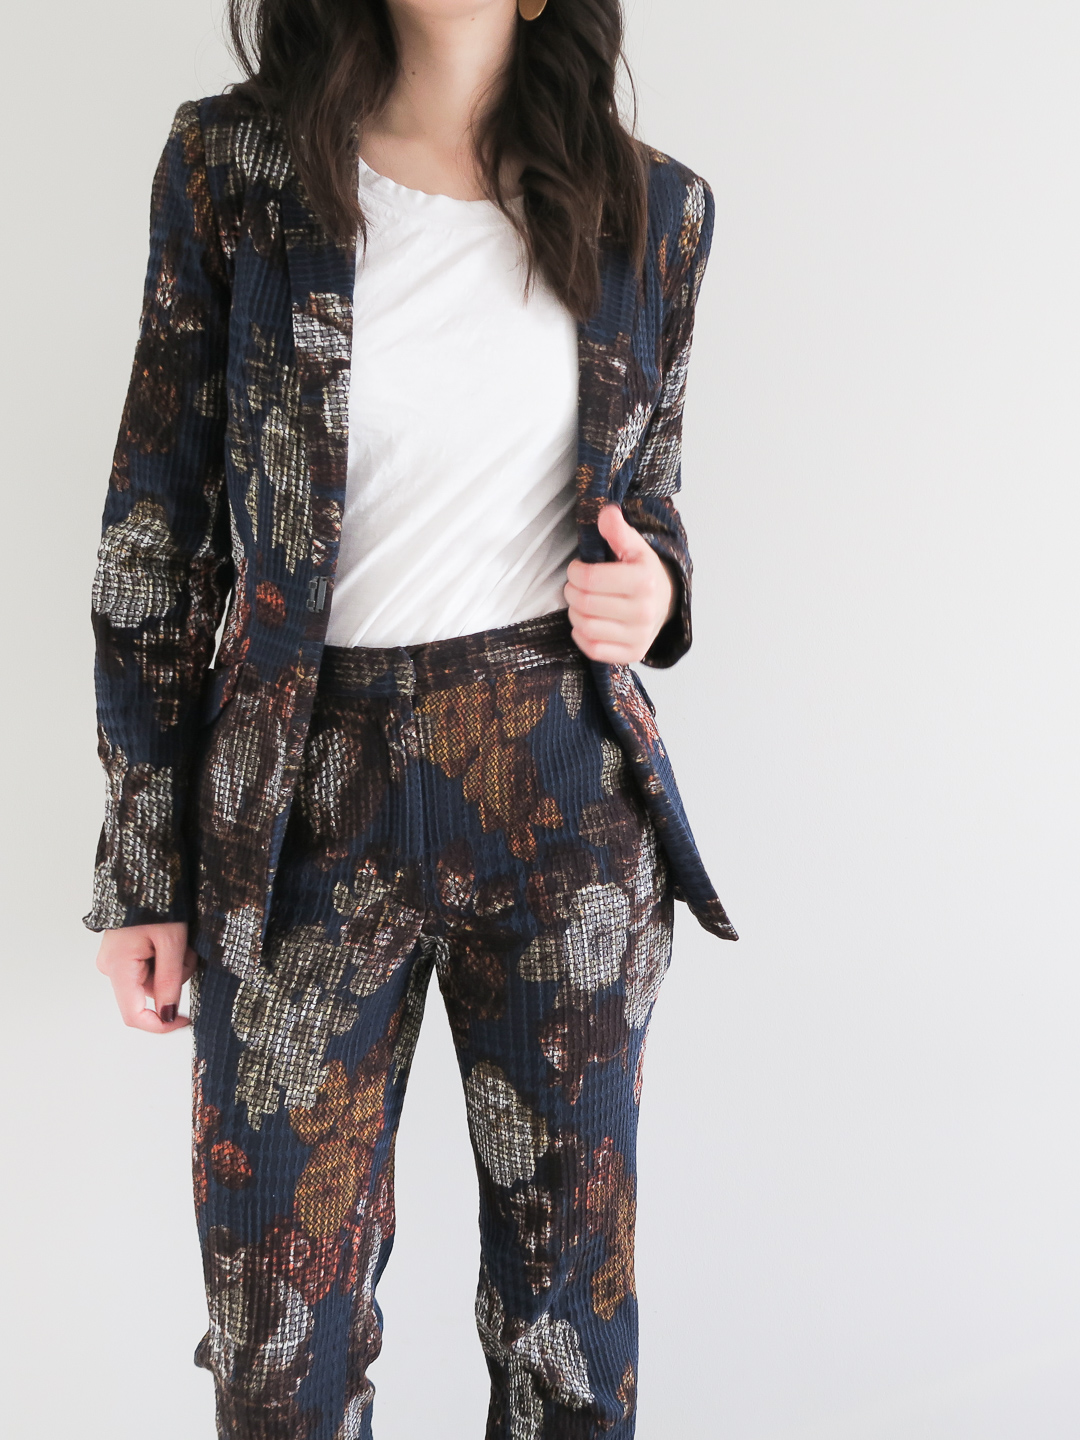 How To Pull Off a Womens Floral Suit | Curiously Conscious